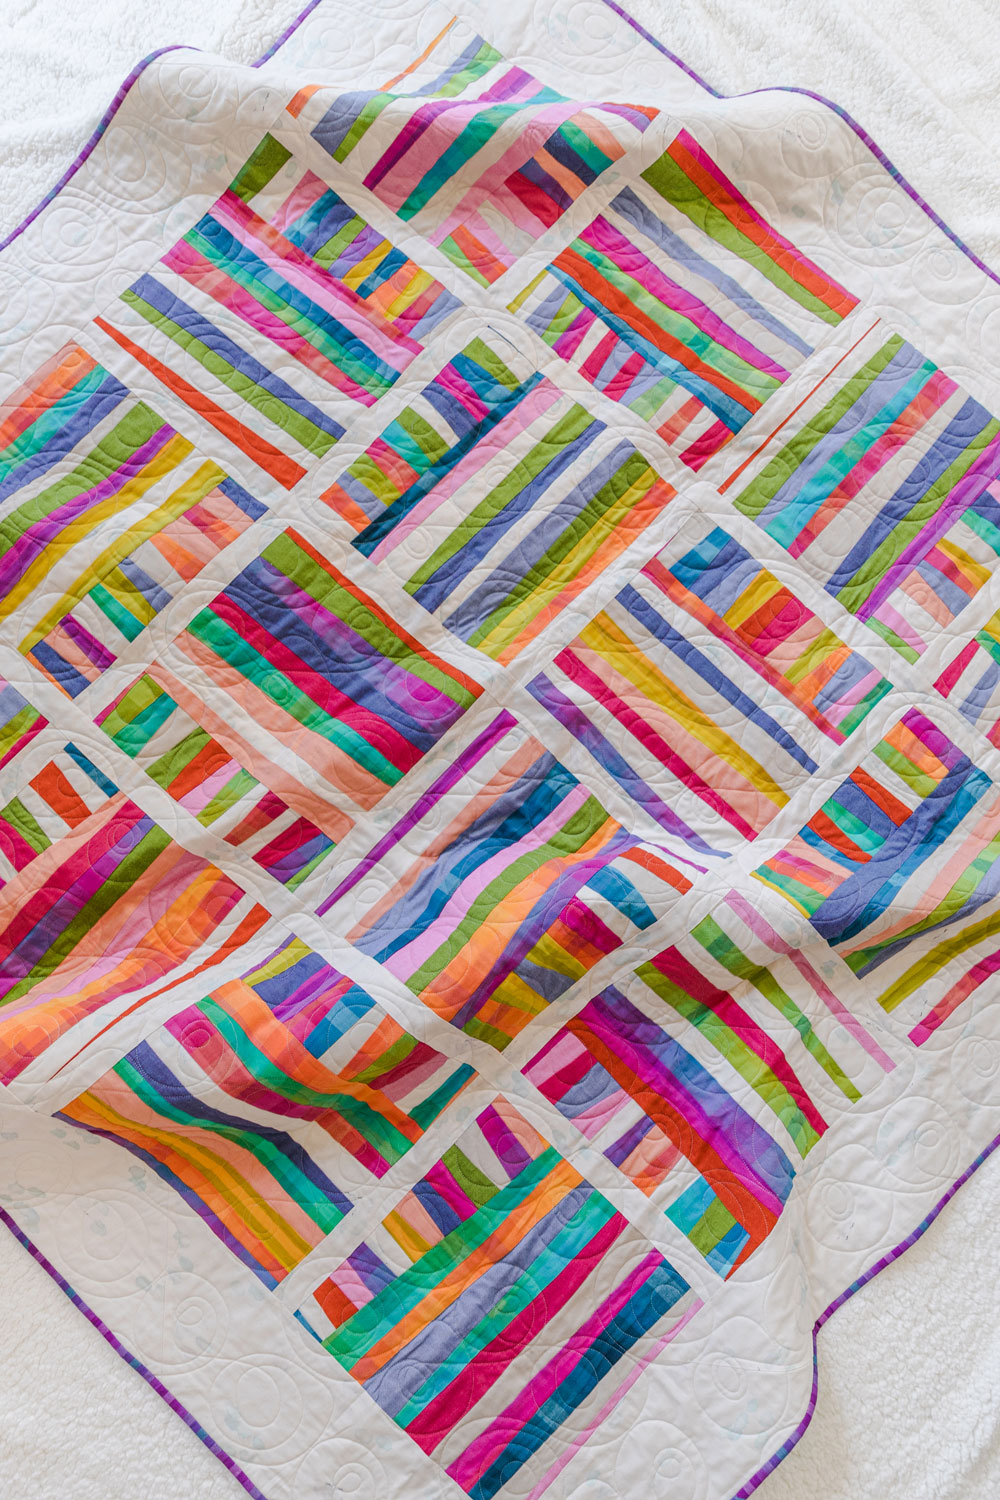 The Shine quilt sew along includes lots of added tips and videos to help you make this modern quilt pattern. This fat quarter quilt pattern is beginner friendly and focuses on improv sewing. suzyquilts.com #fatquarterpattern #improvquilt